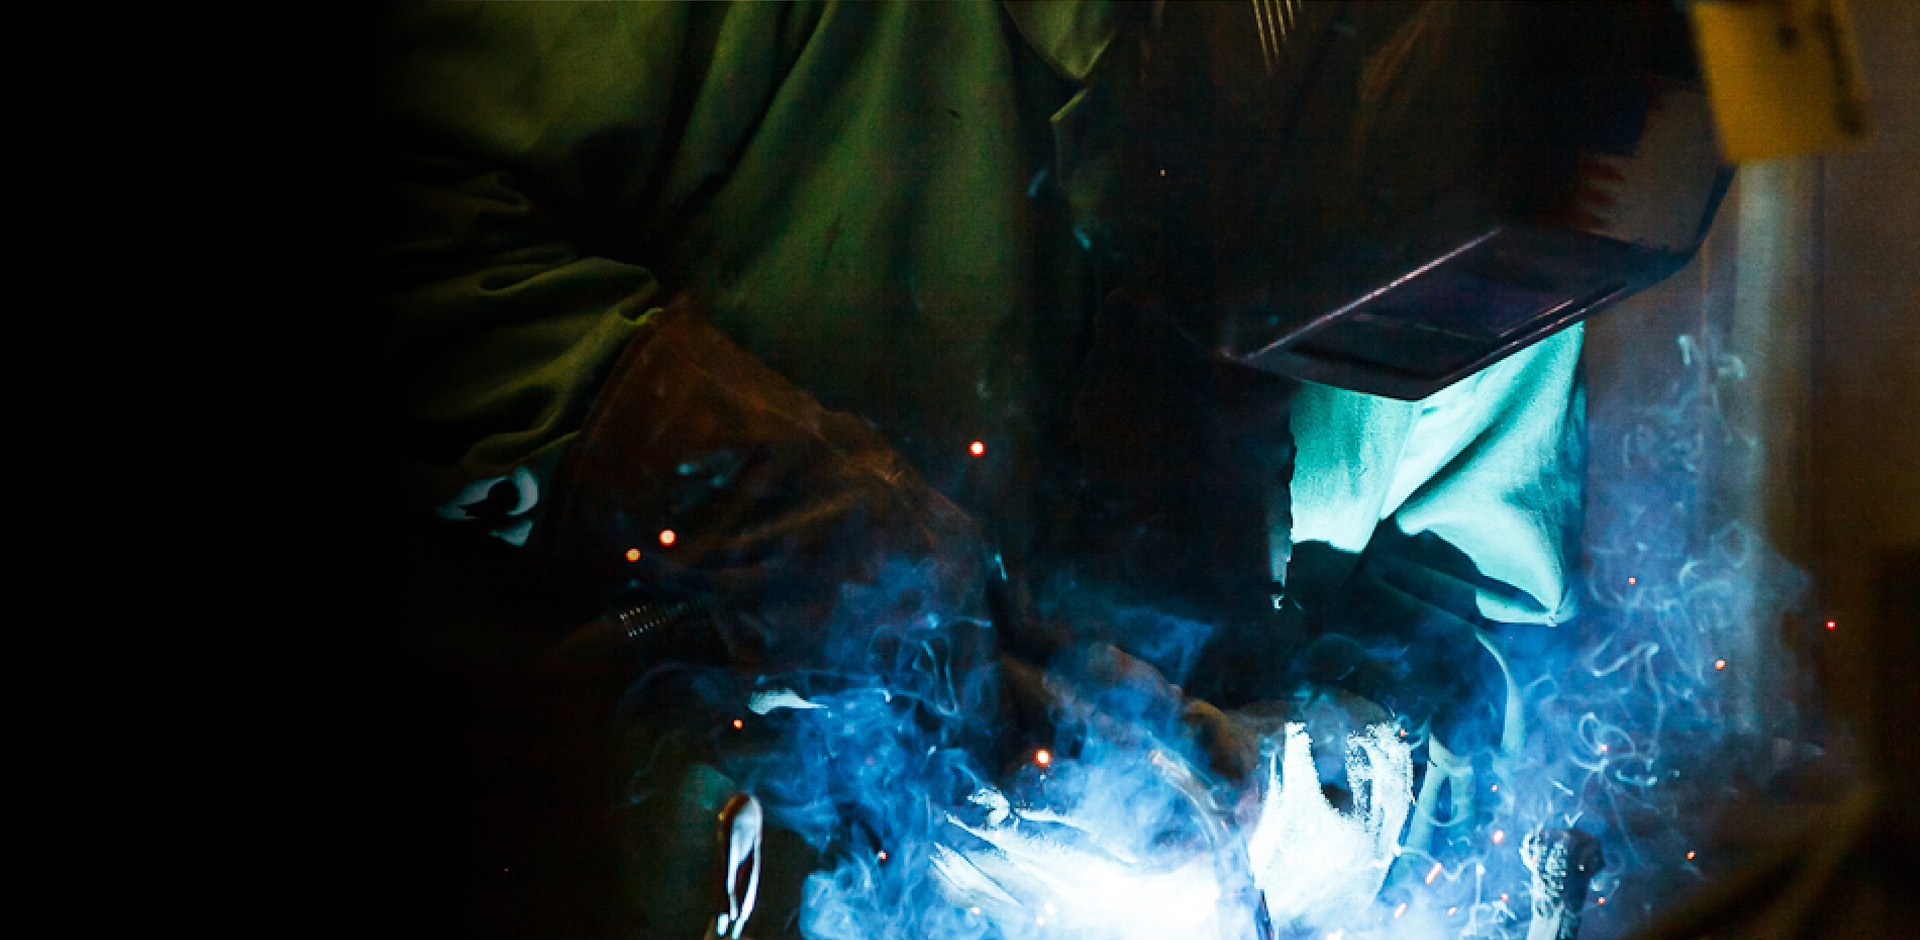 manufacturing metal fabrication welding Tri-State Industries & Automation